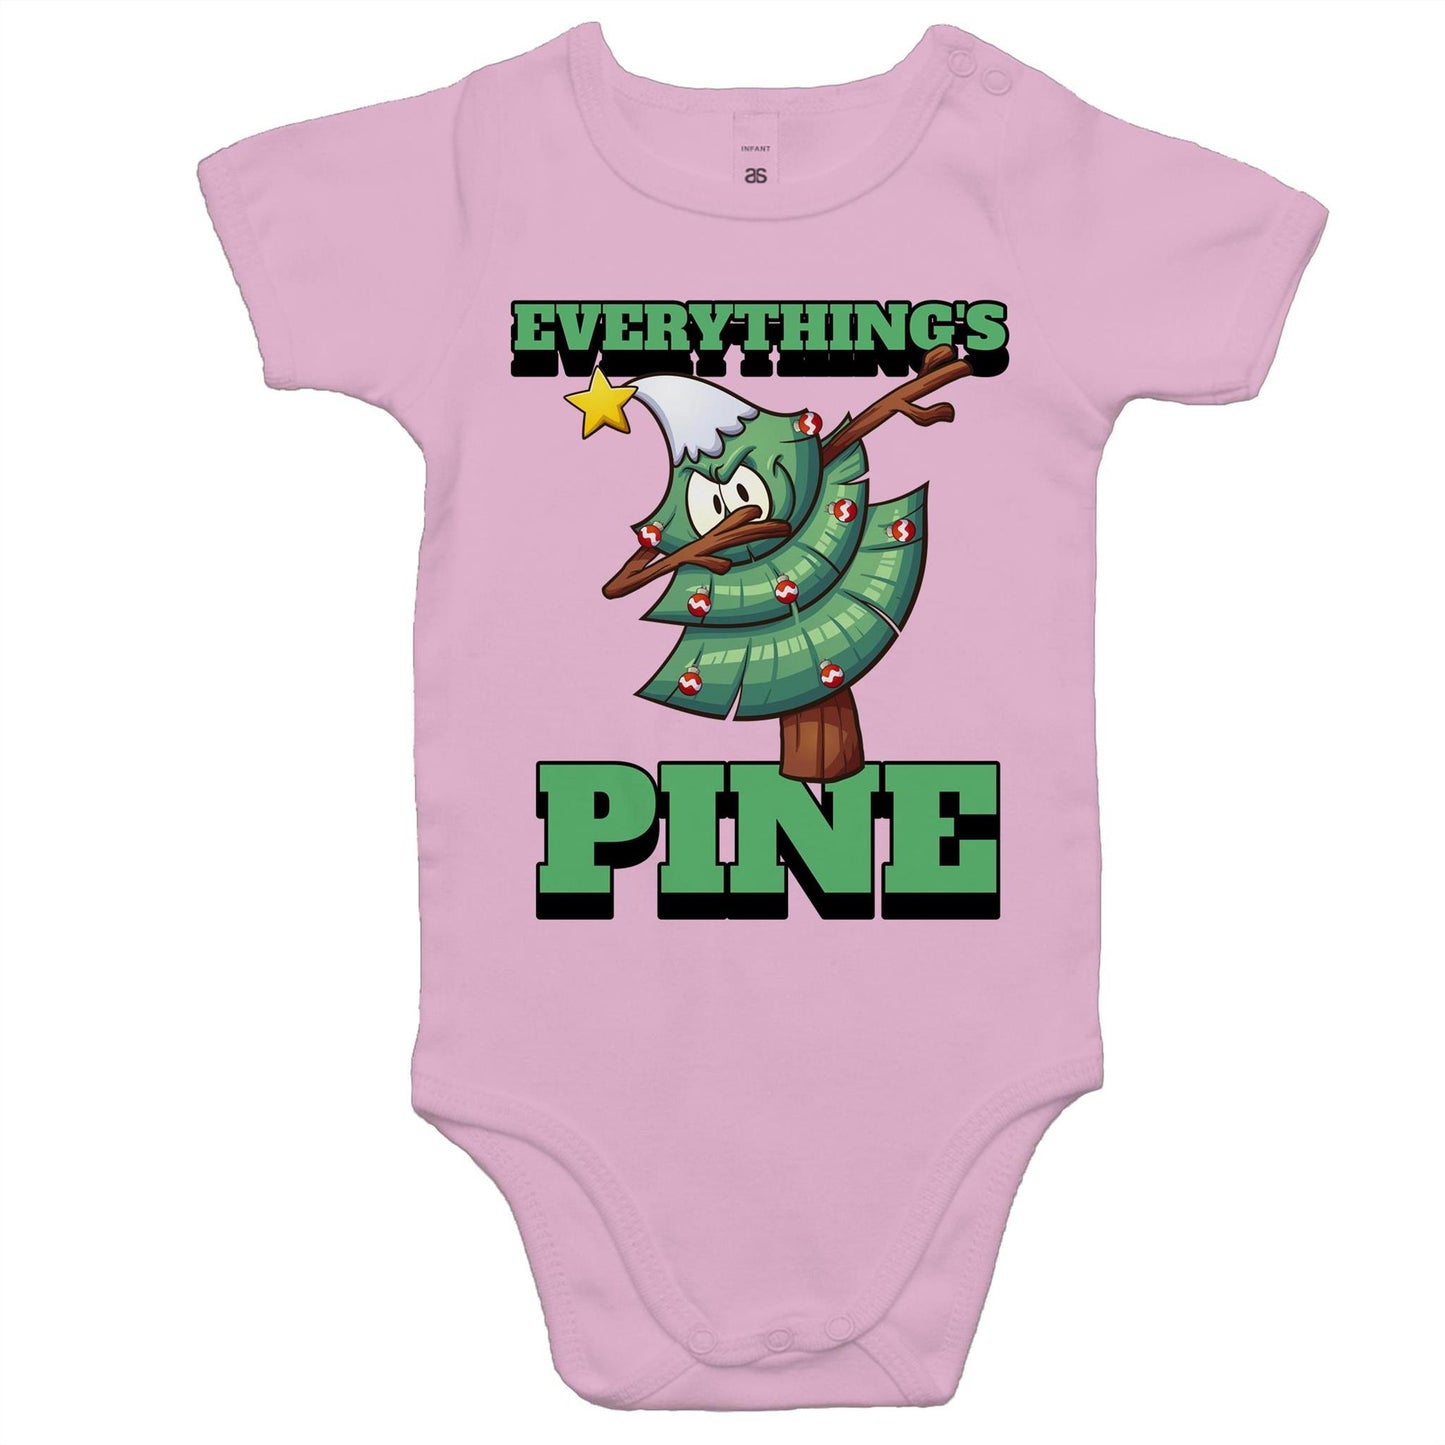 Everything's Pine - Baby Bodysuit Pink Christmas Baby Bodysuit Merry Christmas